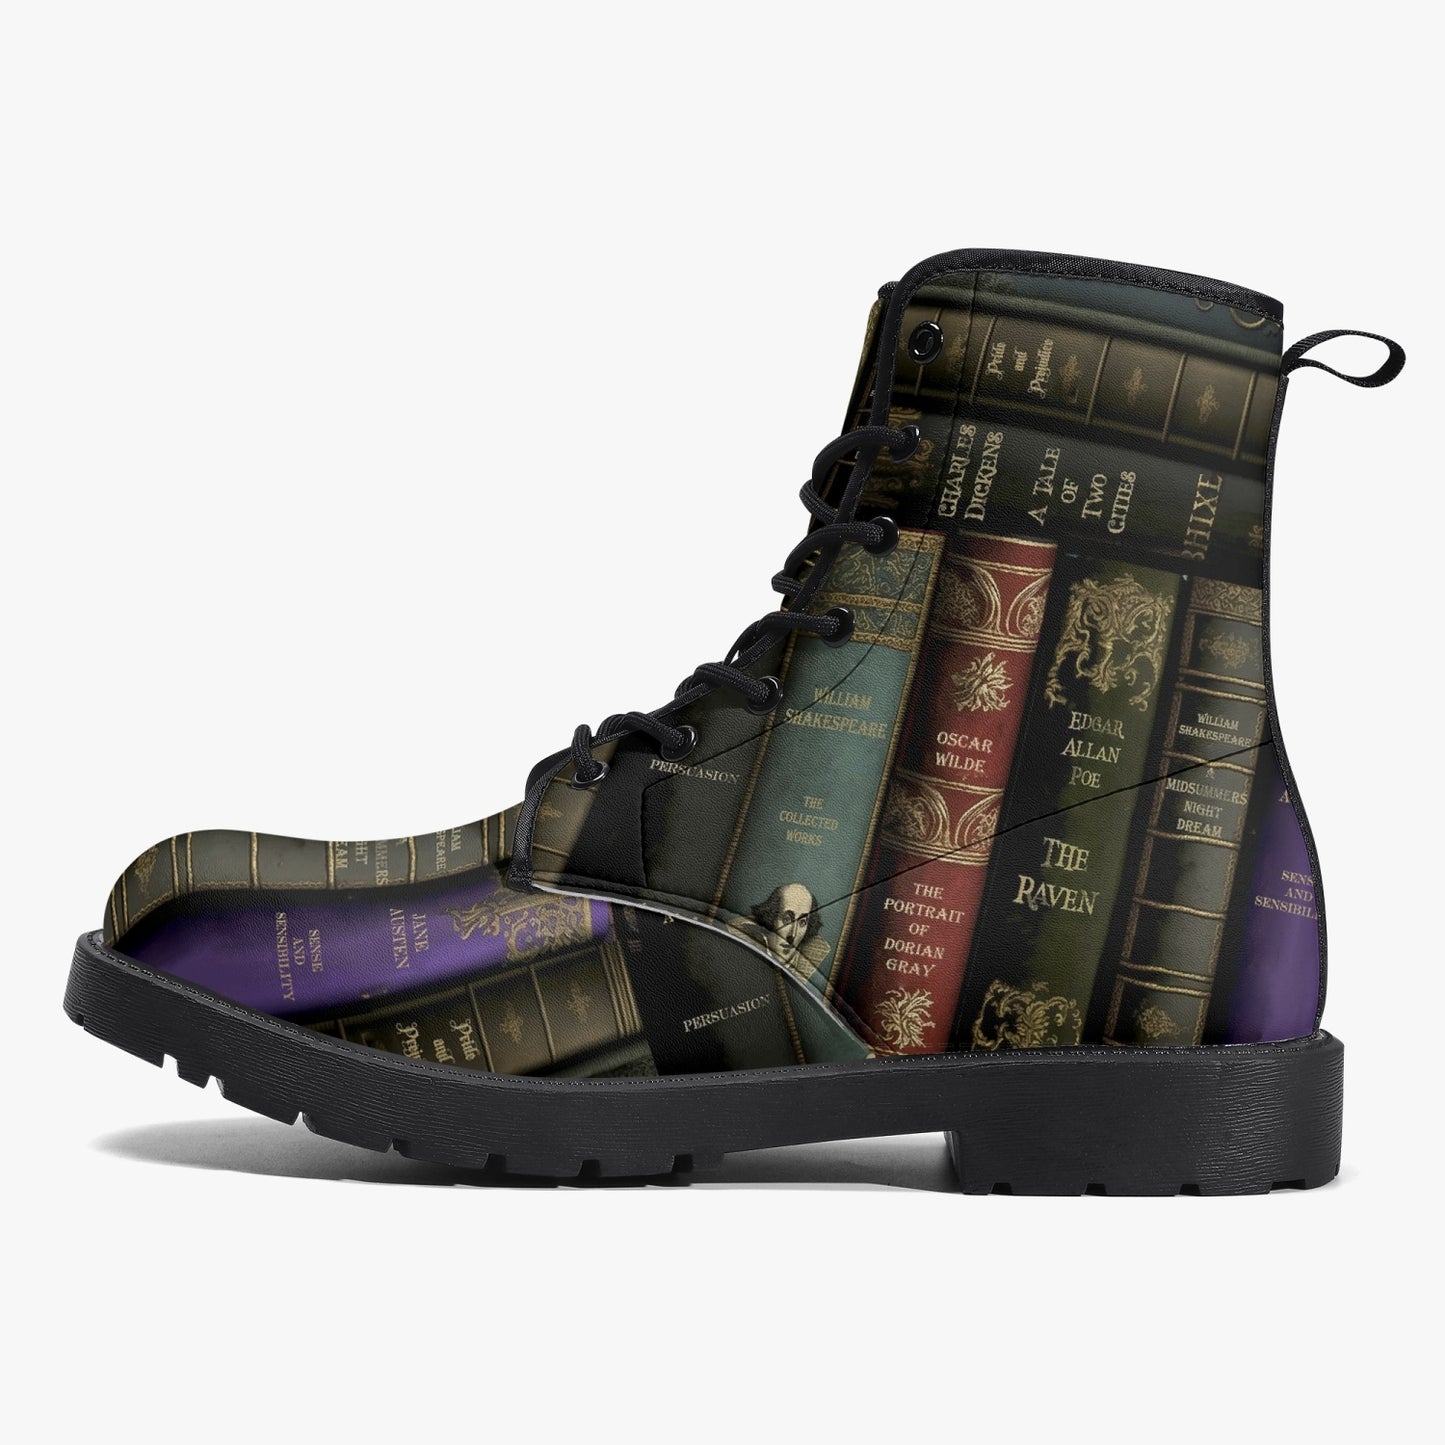 Vintage Books Combat Boots - Dark Academia Aesthetic Shoes - Librarian Boots (JPVINBOOKS)